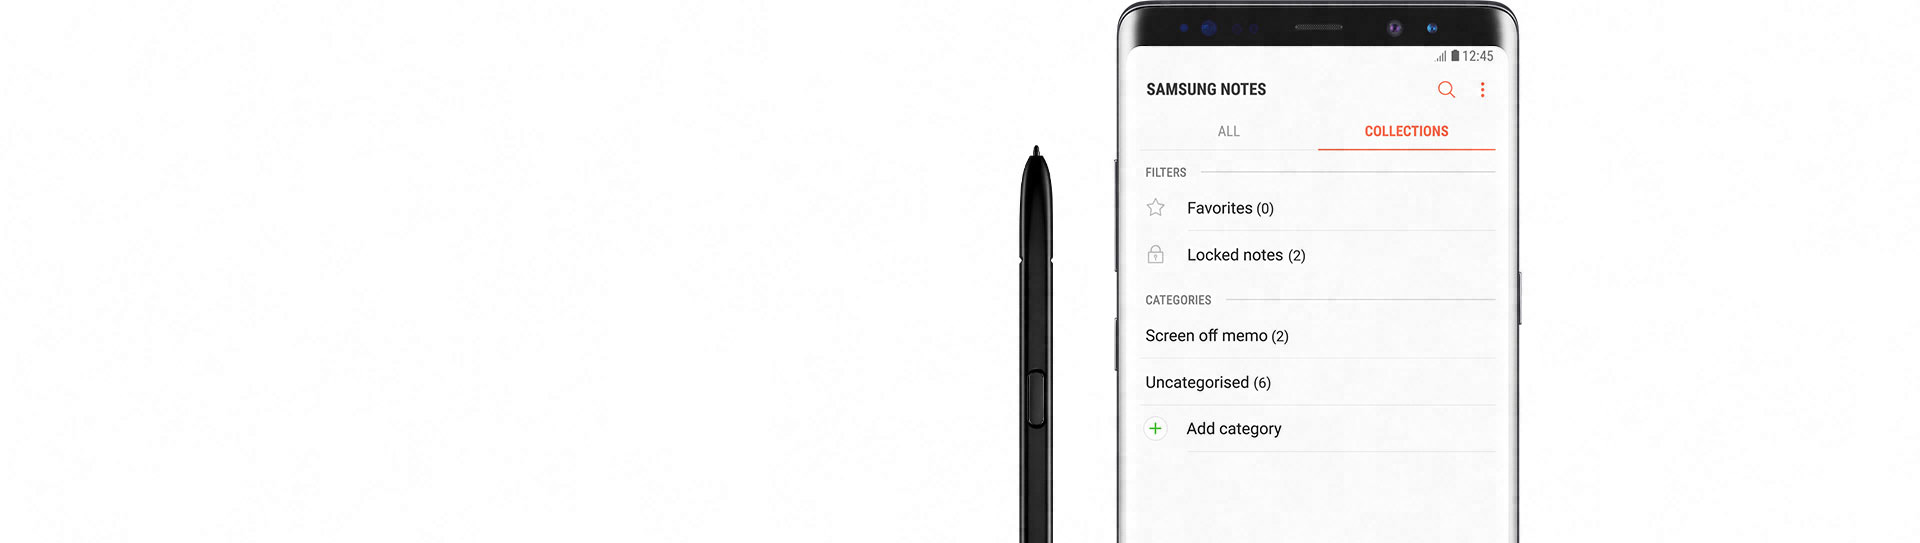 samsung-notes-apps-the-official-samsung-galaxy-site